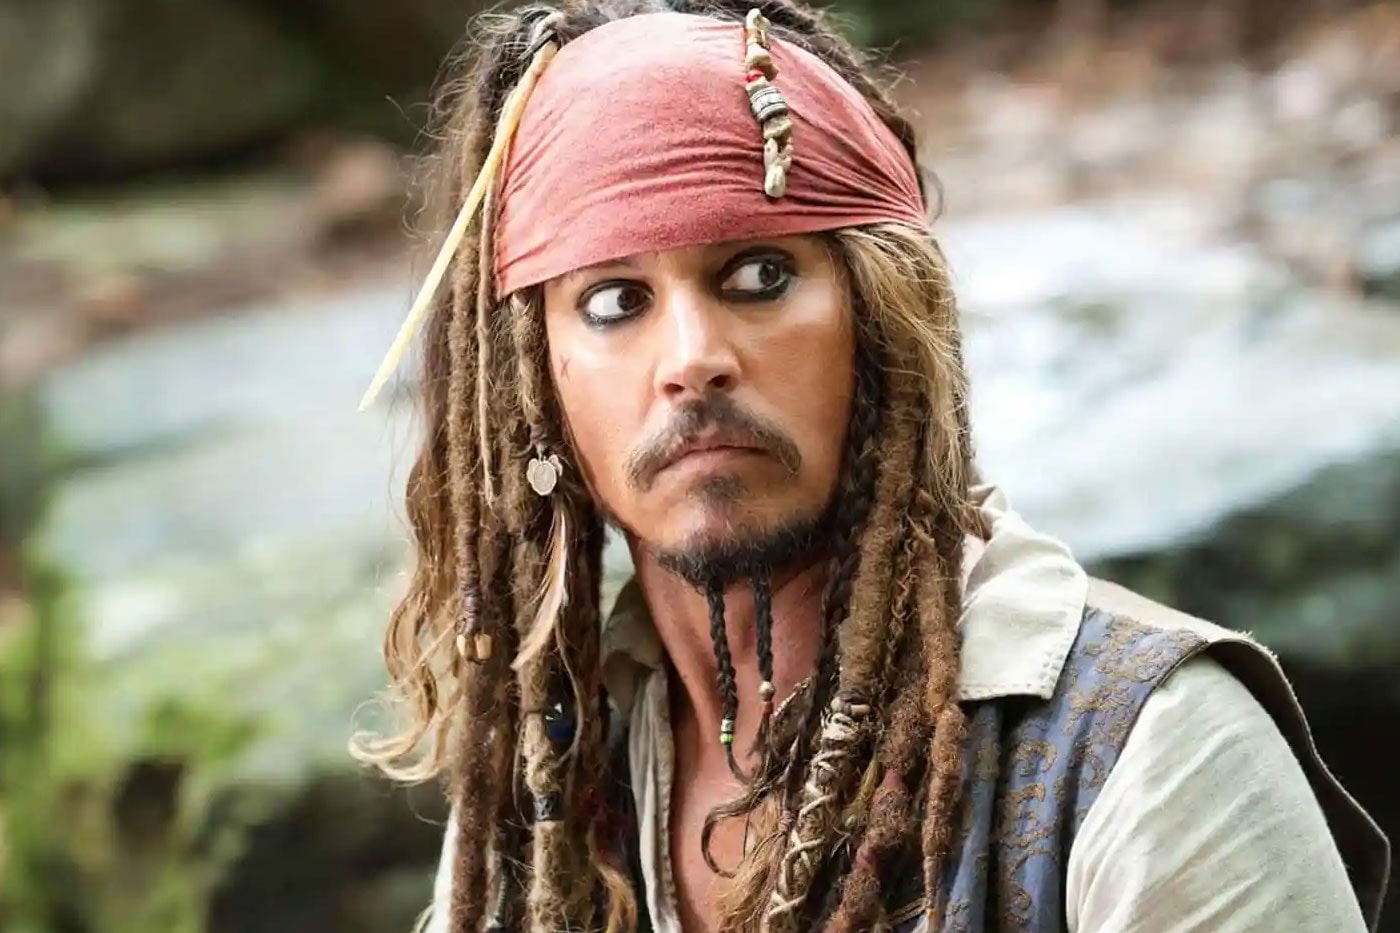 Johnny Depp Claims He Will Not Want Return to 'Pirates of the Caribbean' Franchise amber heard defamation suit captain jack sparrow disney